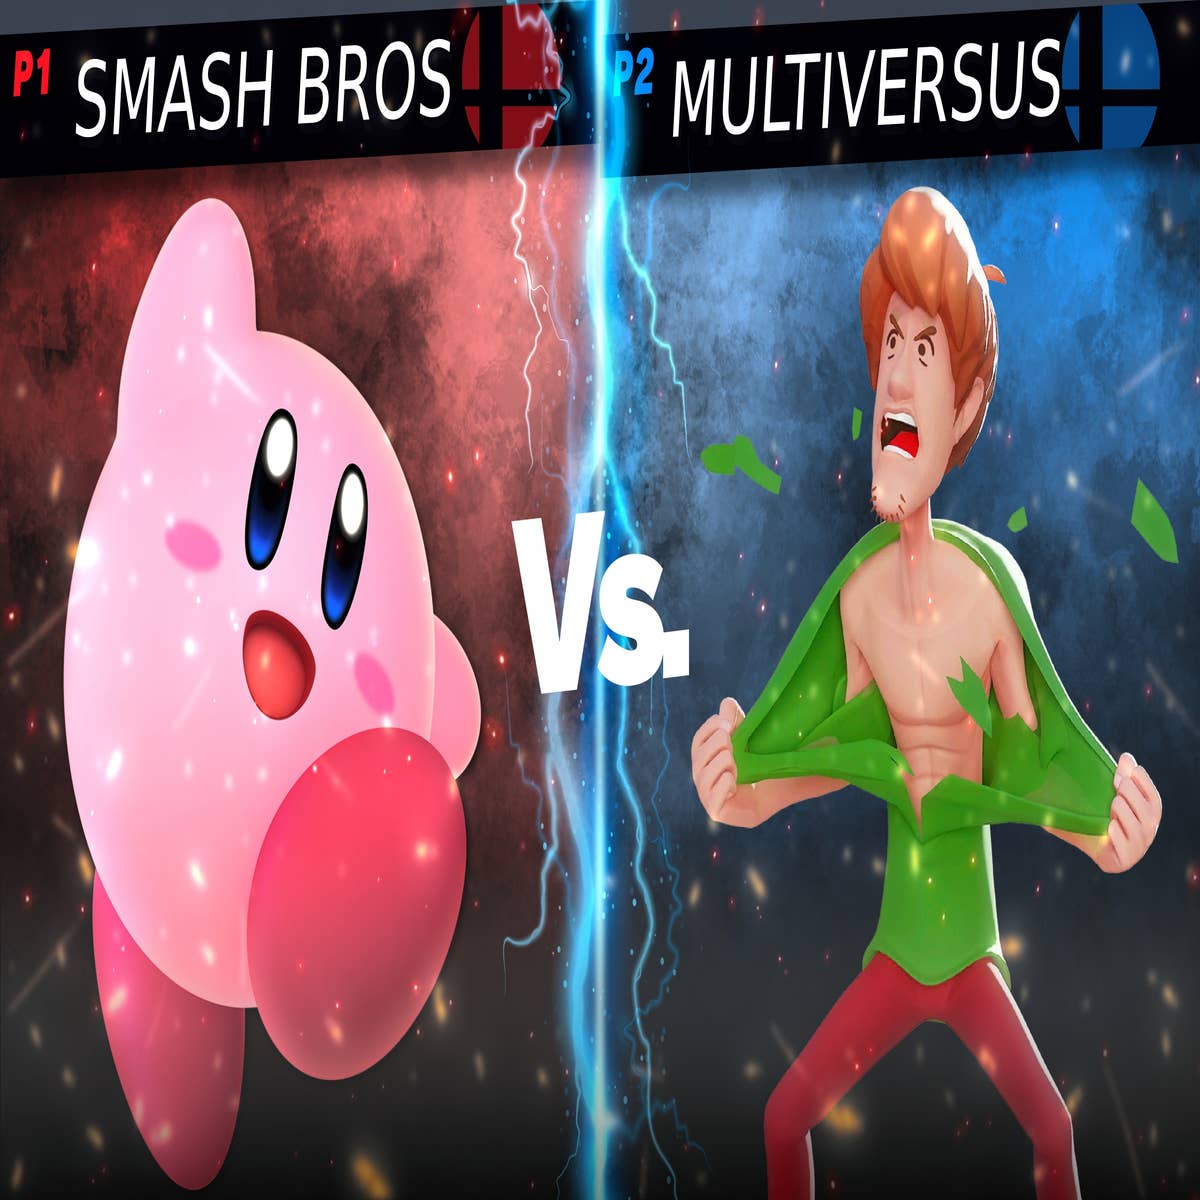 Multiversus hands-on: Finally, a compelling Smash Bros. clone